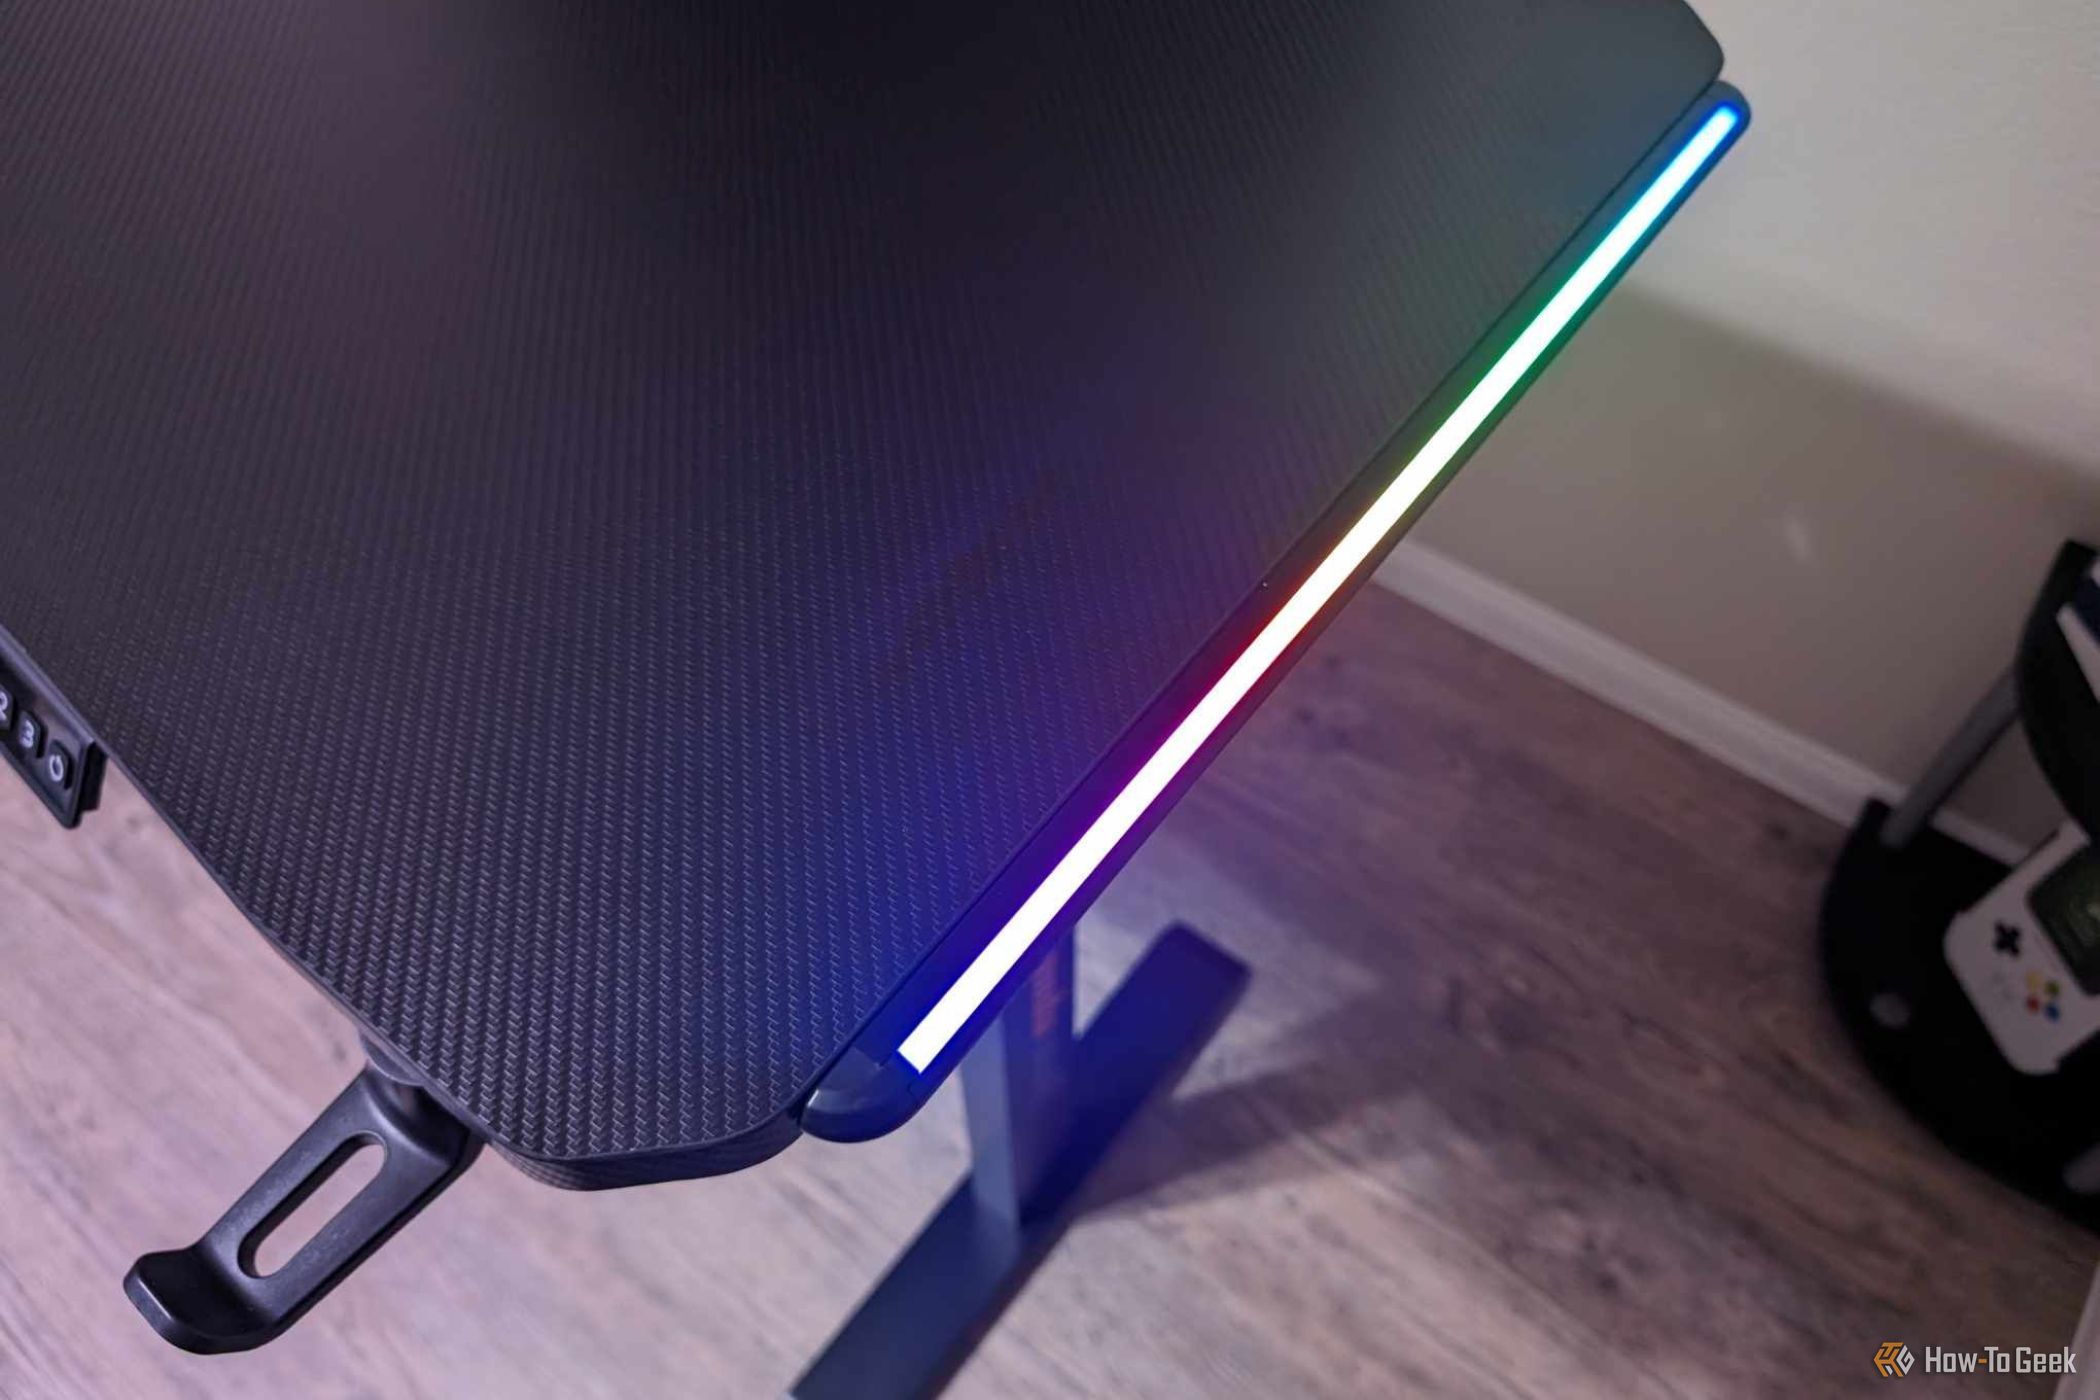 AndaSeat FlyQuest Edition Gaming Standing Desktop with RGB light bar